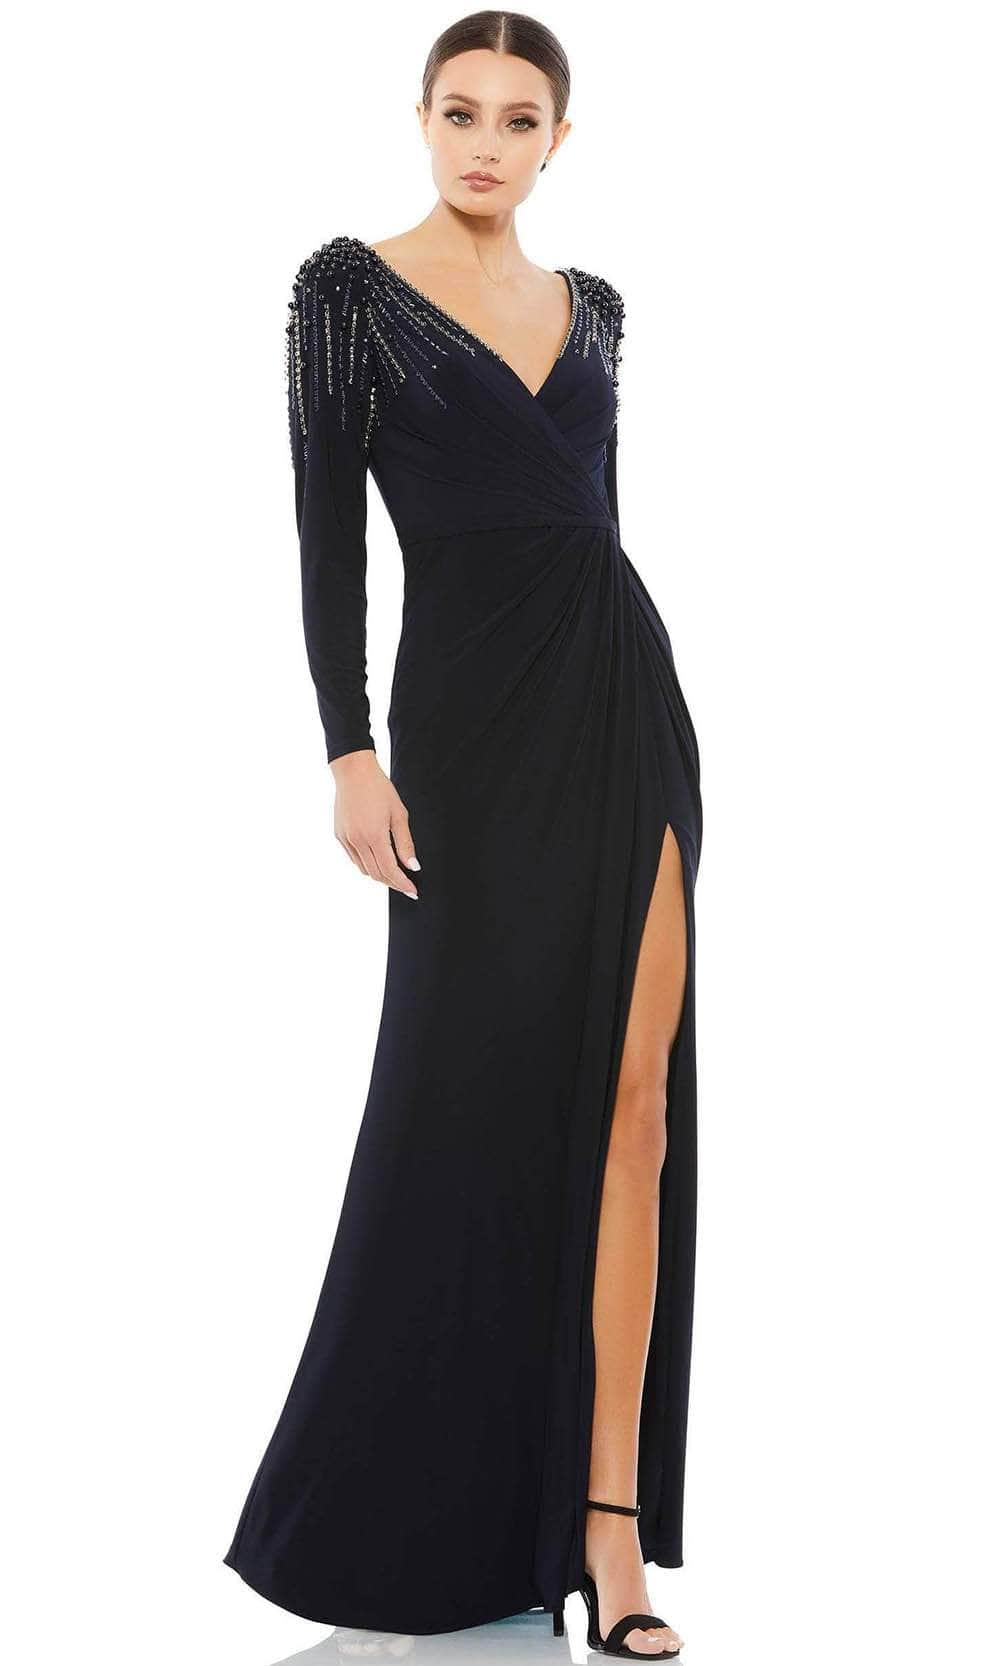 Mac Duggal 55715 - Long Sleeved Embellished Shoulders Jersey Dress Special Occasion Dress 4 / MIDNIGHT